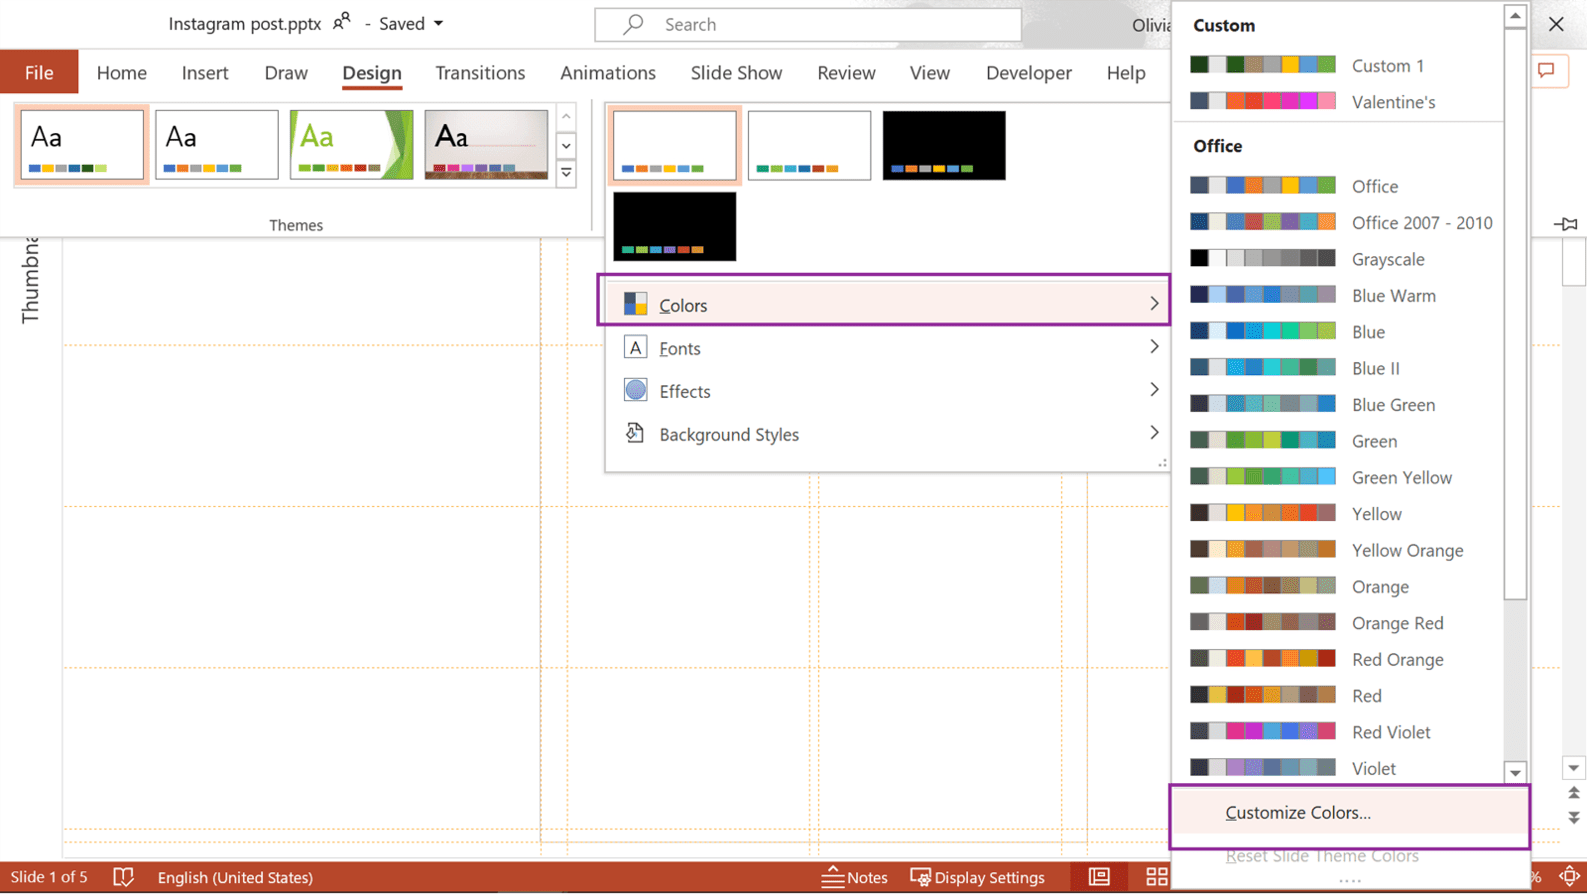 Screenshot of powerpoint showing where to find the Customize Colors menu so you can set up colours for your custom social media graphic